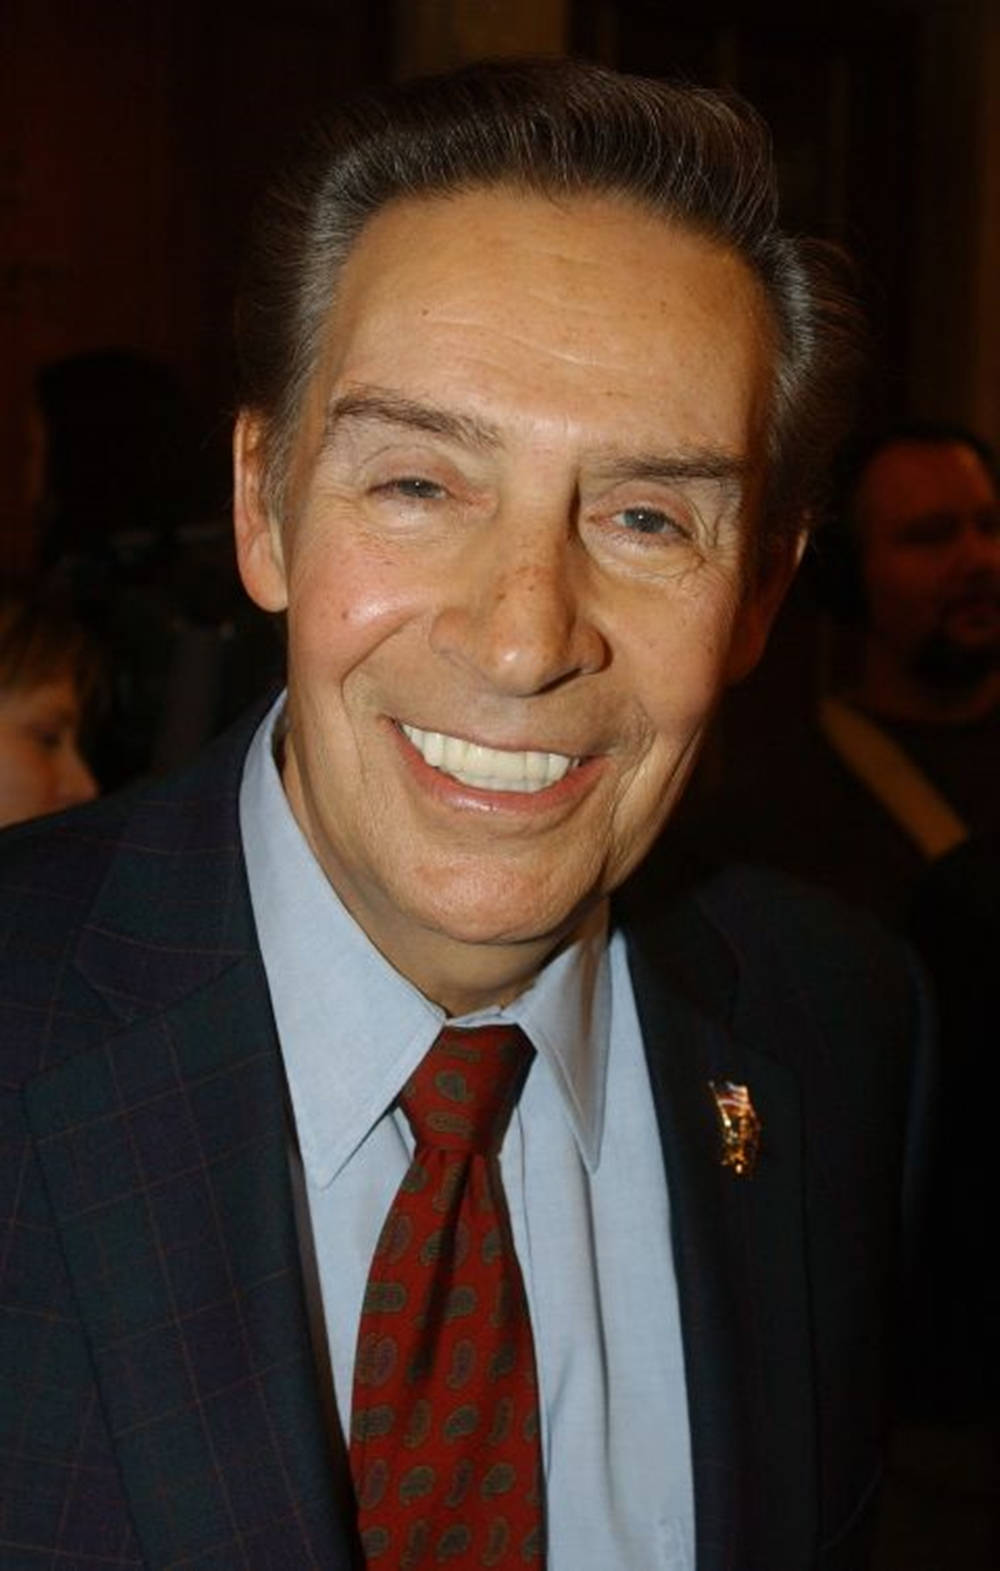 Notable Actor Jerry Orbach Law And Order Press Conference Wallpaper